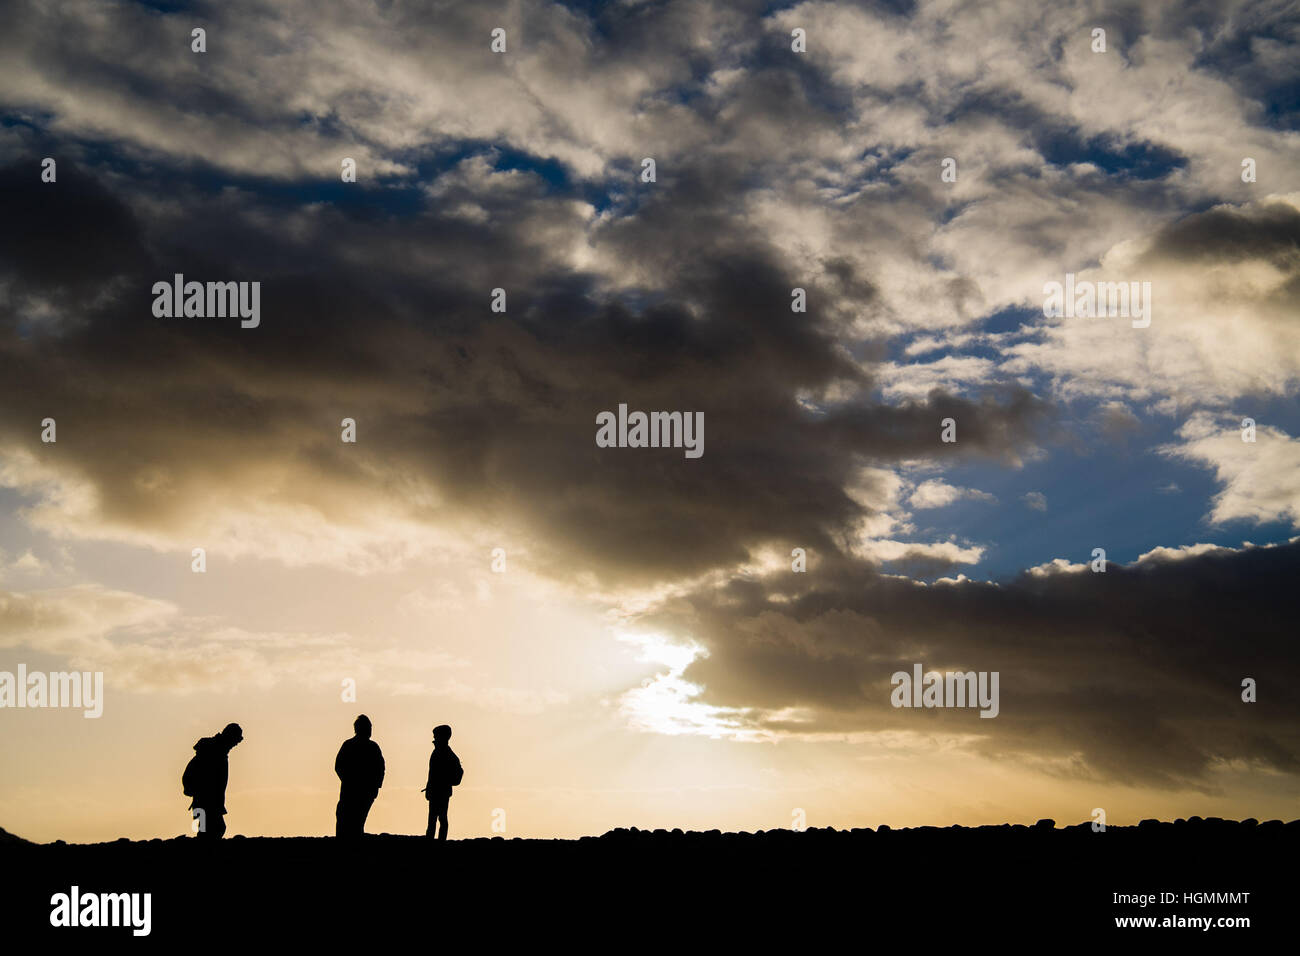 Aberystwyth Wales UK, Wednesday 11 Jan 2016  UK weather: A group of people walking along the Ceredigion section of the Wales Coastal Path  at Tanybwlch beach Aberystwyth, as the sun bursts through the clouds before the stormy, wet and possibly snowy weather sweeps down from the north overnight   photo © Keith Morris / Alamy Live News Stock Photo